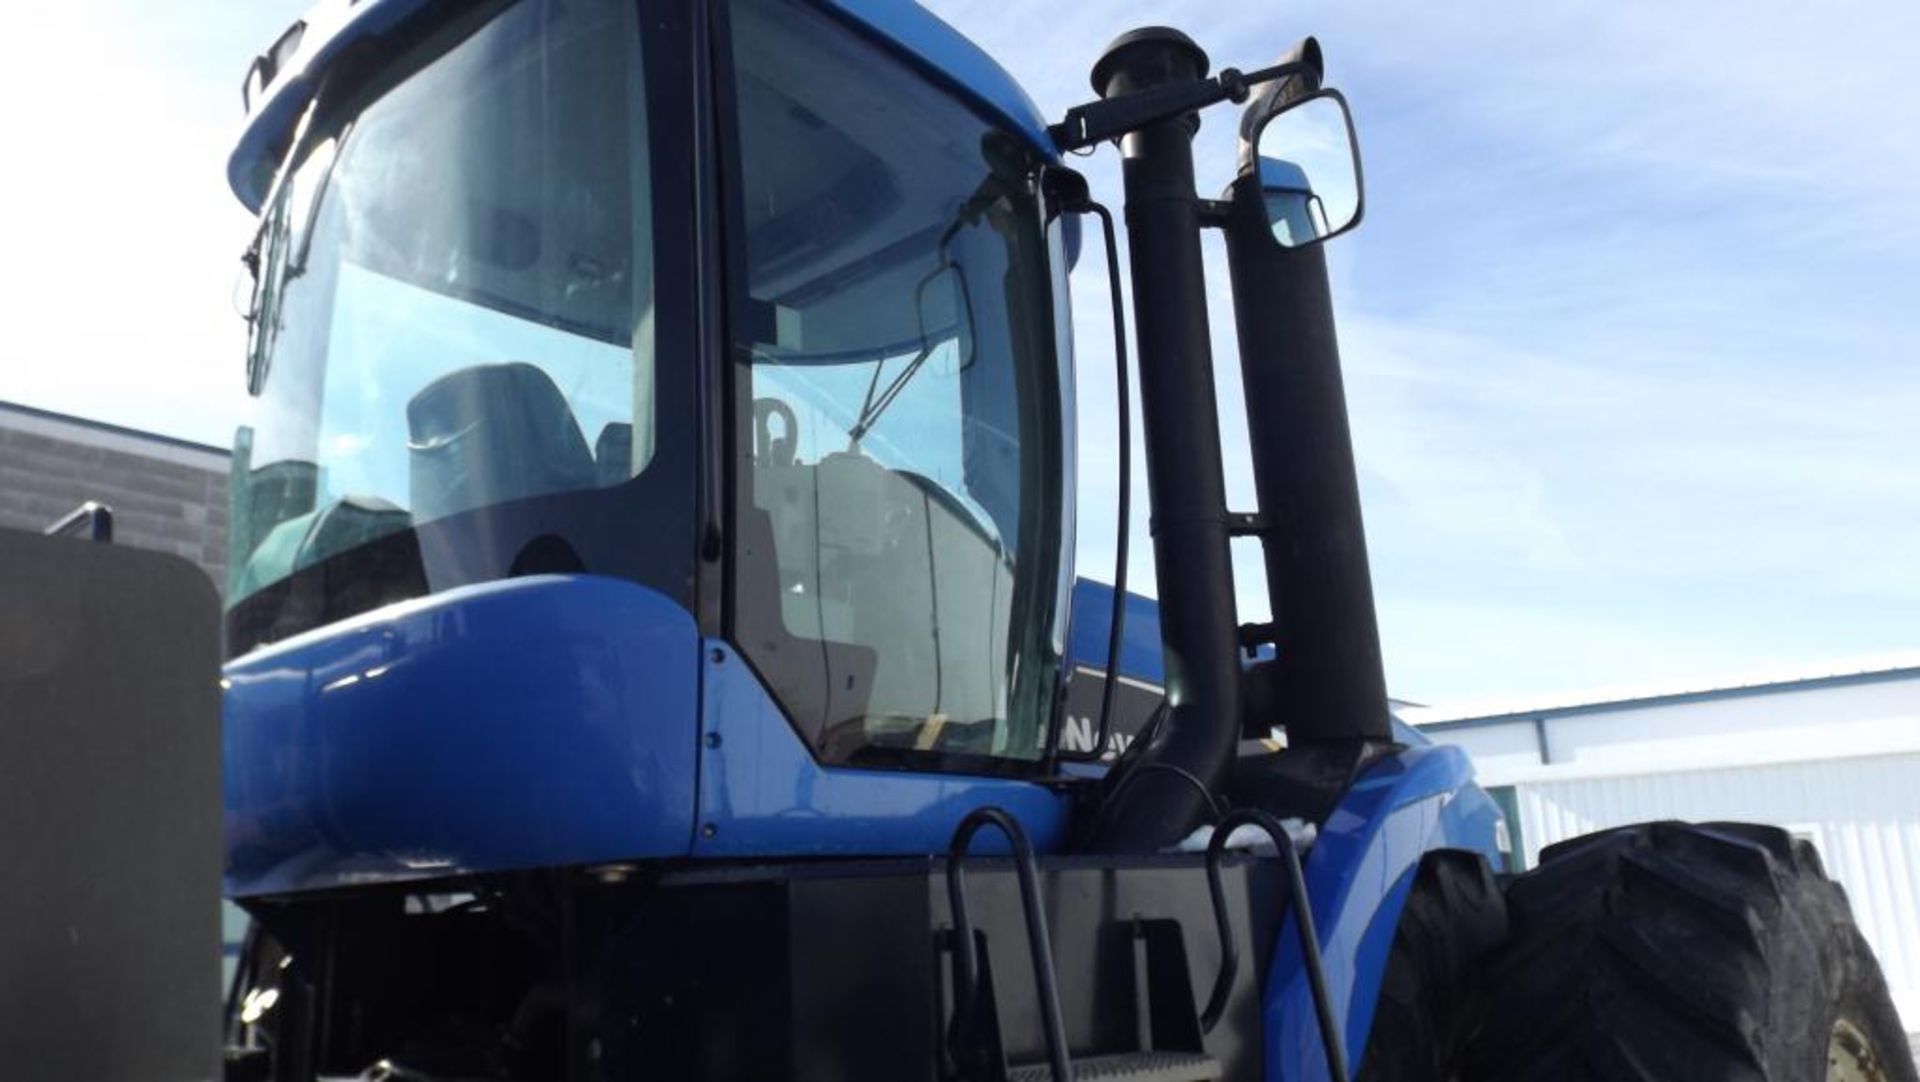 New Holland TJ375 Tractor '03, sn# RVS002016 7683 Hrs, 4WD, Fully Equipped Cab, 375 HP, 16/2 PS, - Image 10 of 24